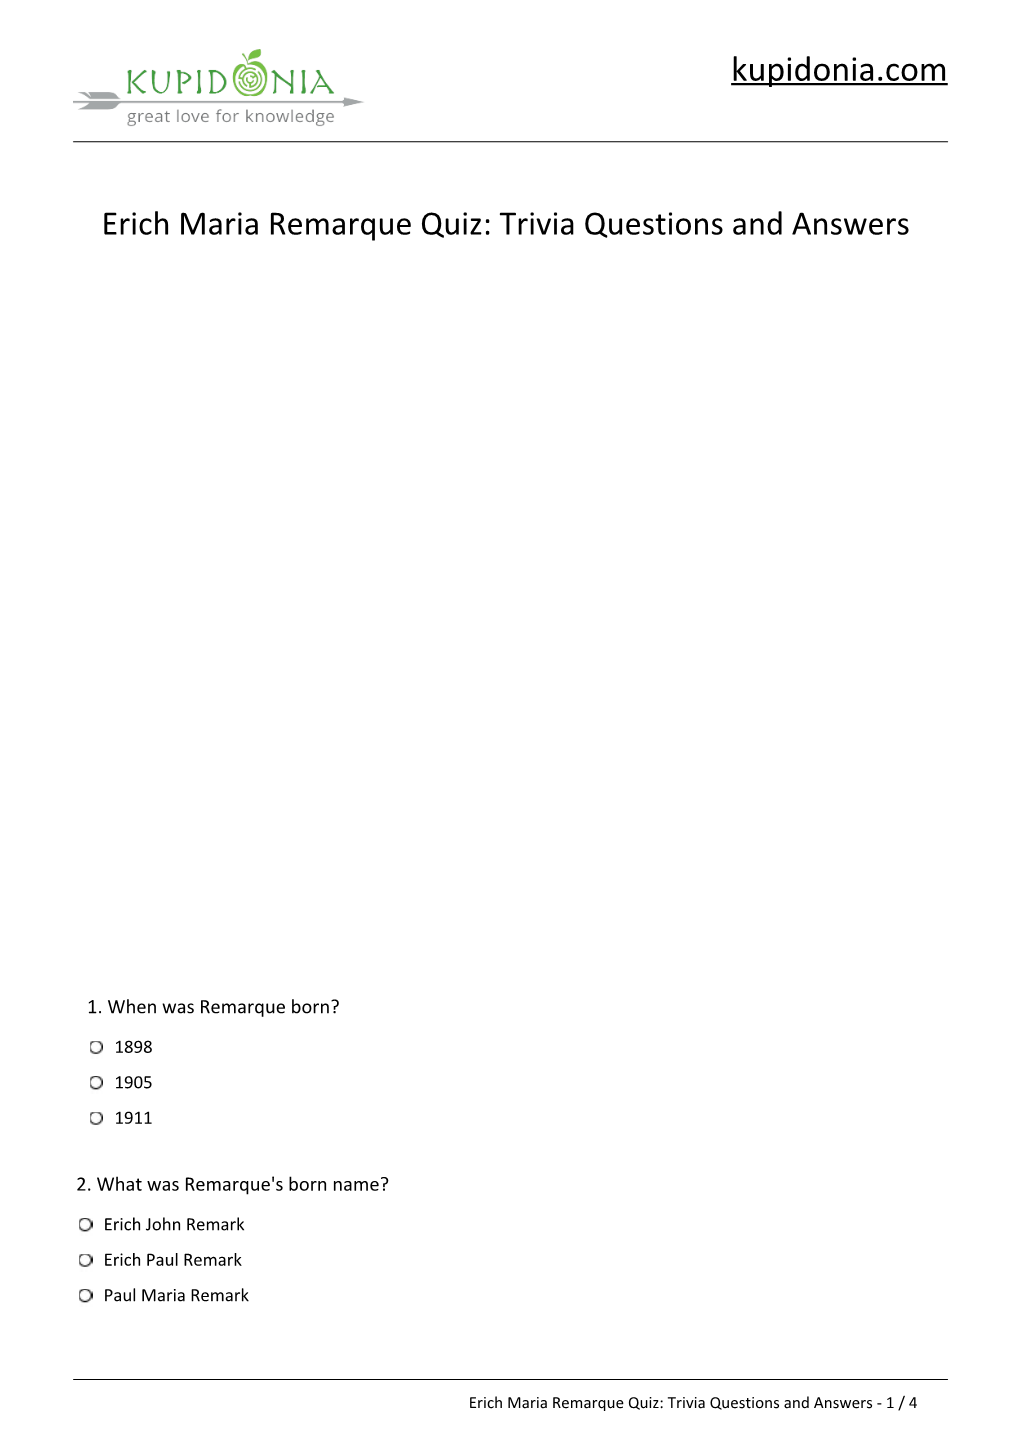 Erich Maria Remarque Quiz: Questions and Answers